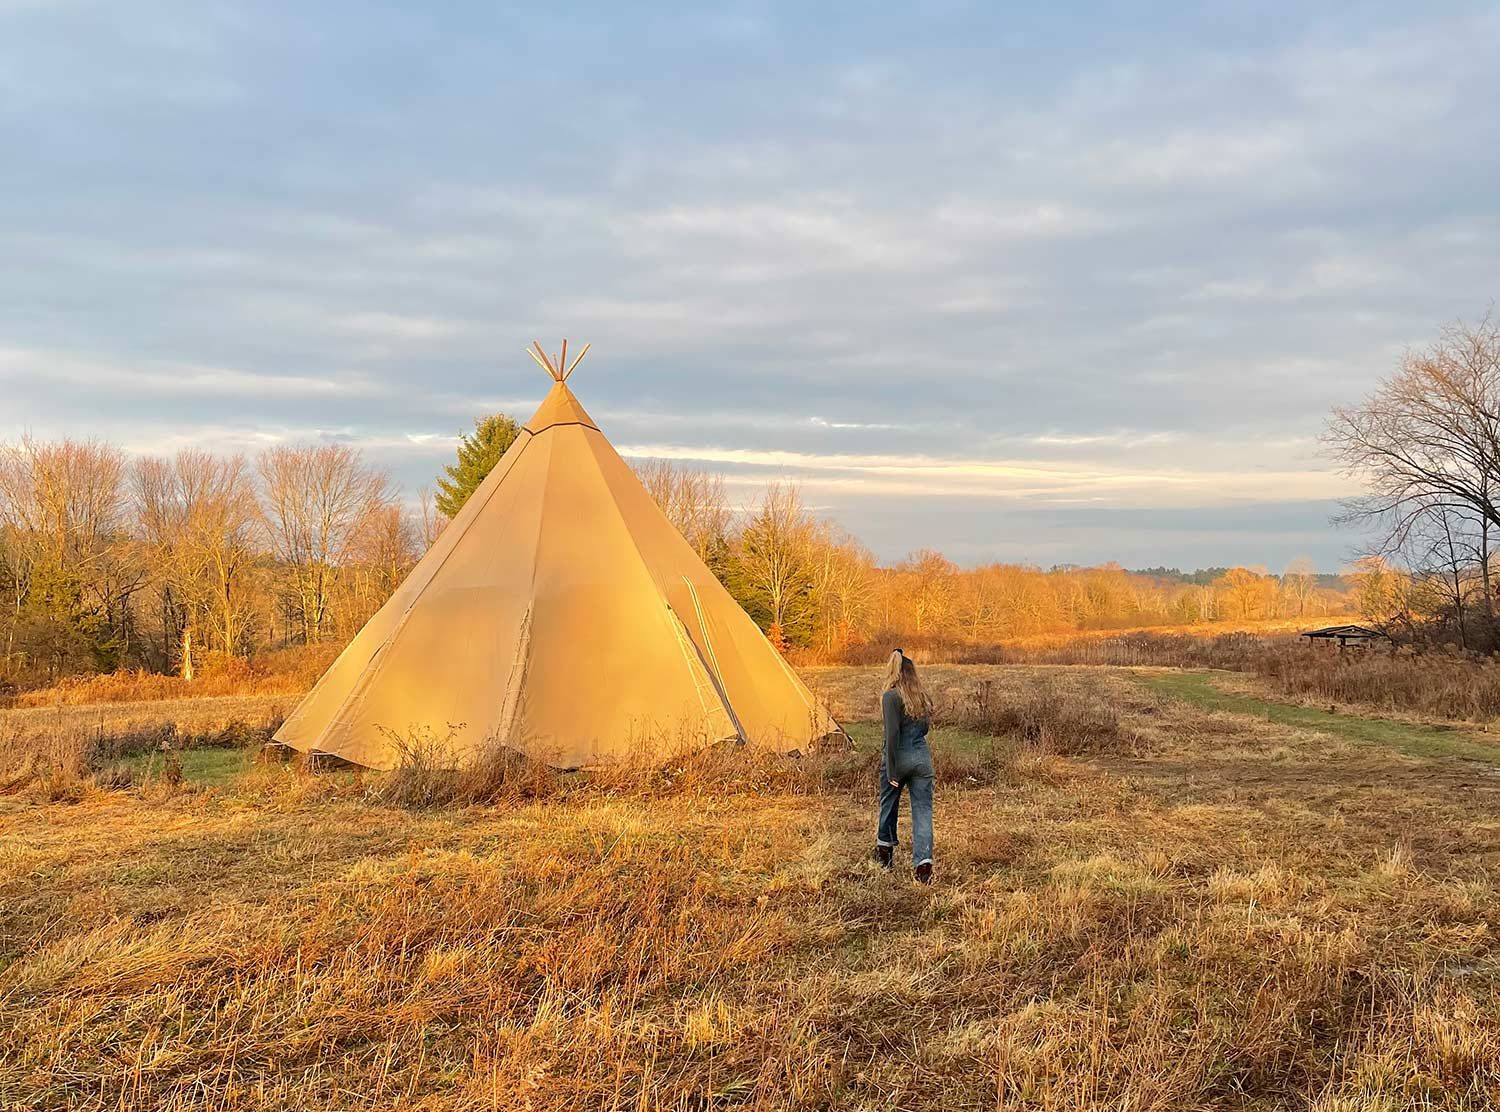 Inness Savoring the last few moments of golden hour as the light hit the tipi